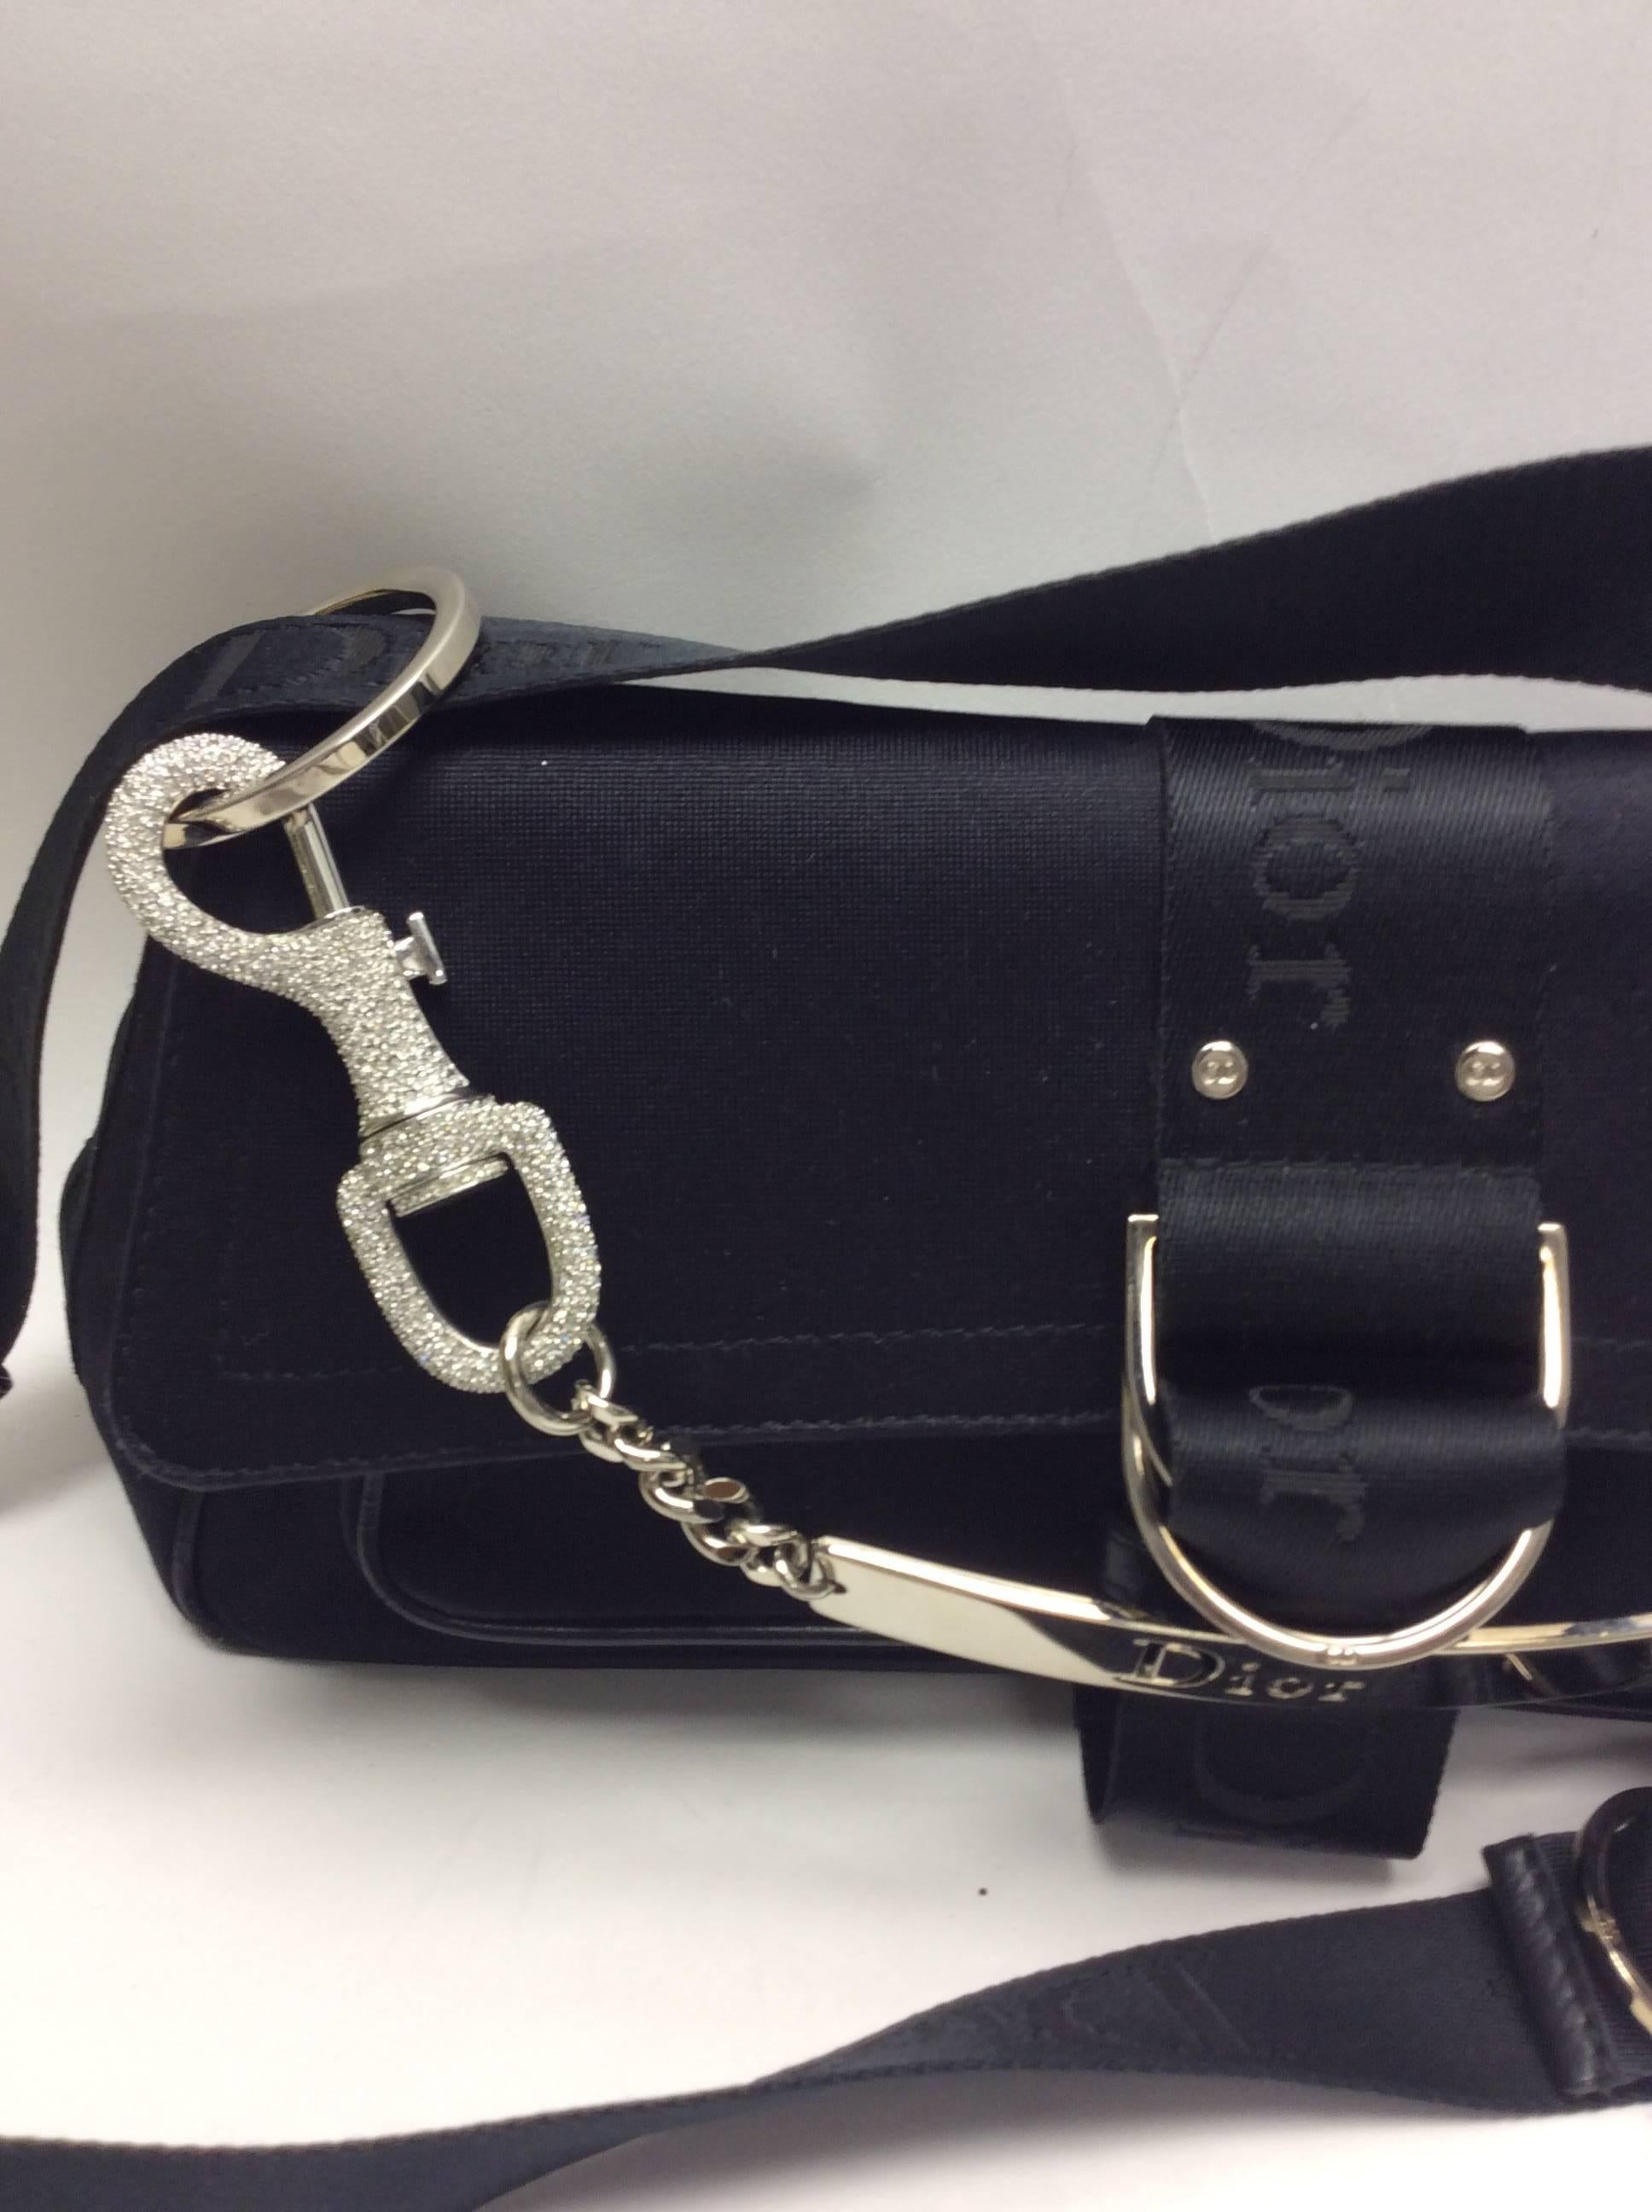 Christian Dior Black Satin Small Purse
Black satin small purse with dior charm details
$599
Silver toned hardware and silver chain detail
Crossbody strap
